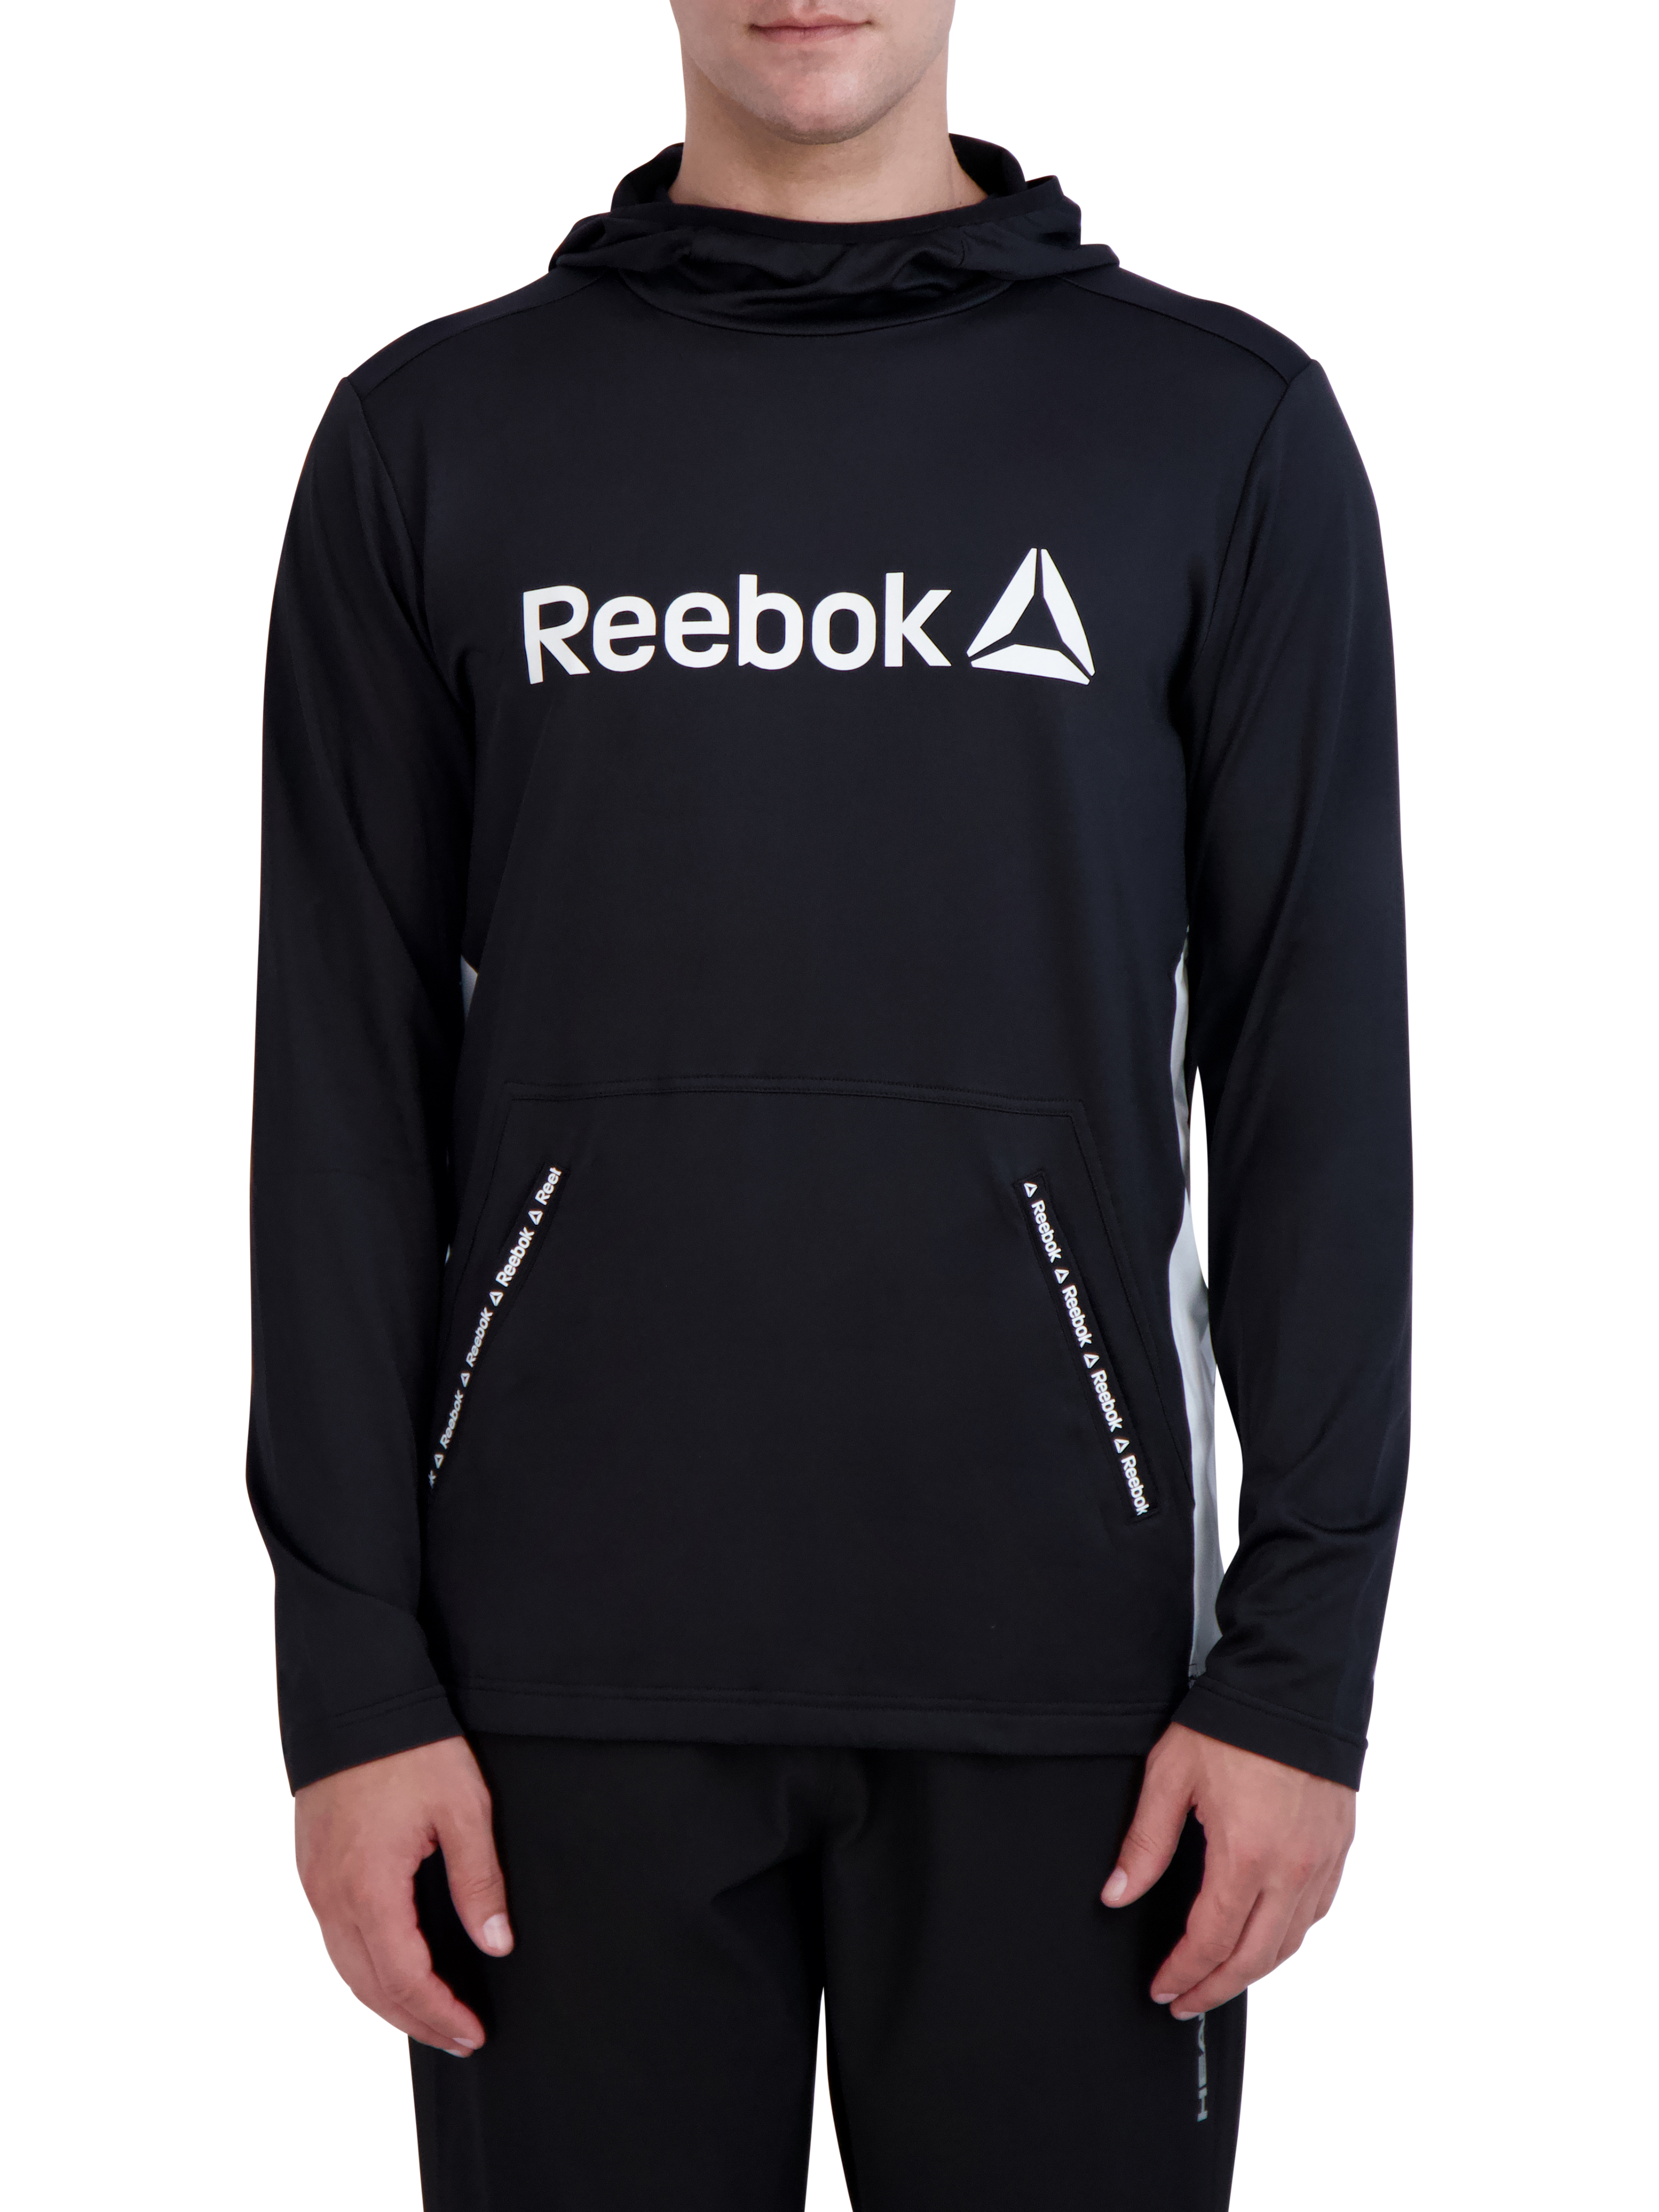 Reebok Men's Pullover Hoodie, up to Size 3XL - image 1 of 6